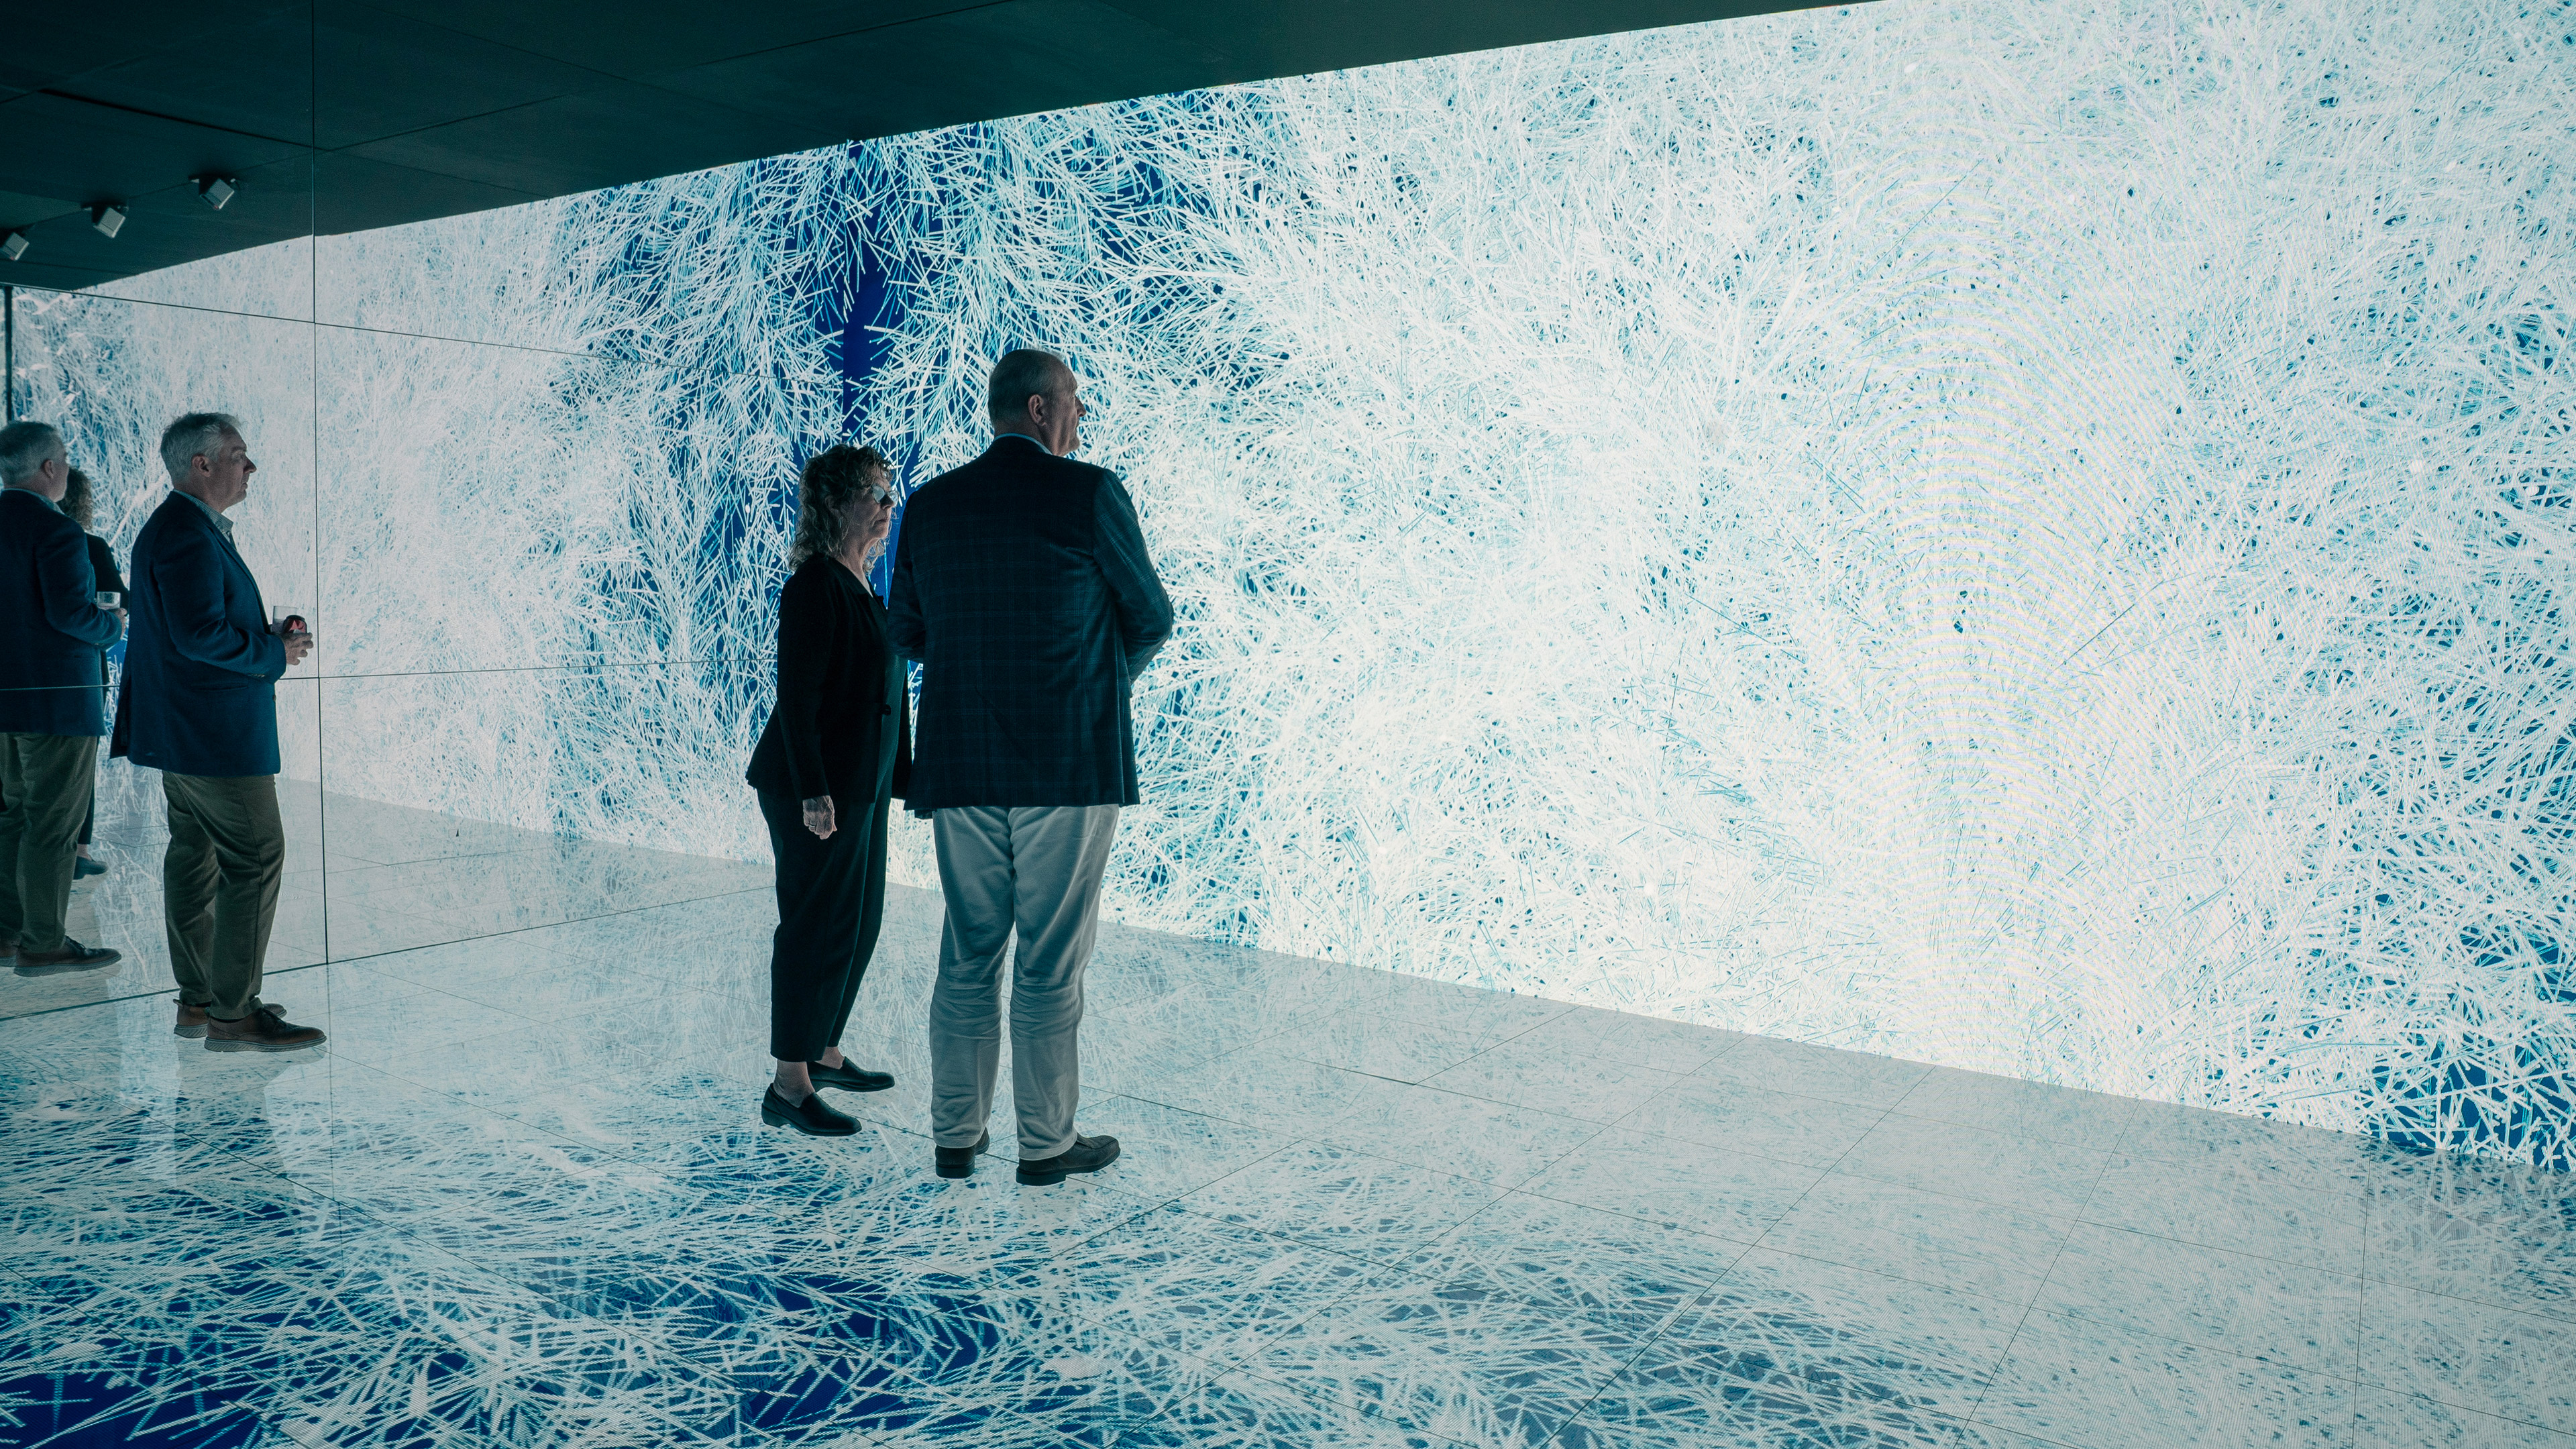 Three people standing in an interactive installation with led walls and floors. The led screens are covered with ice patterns